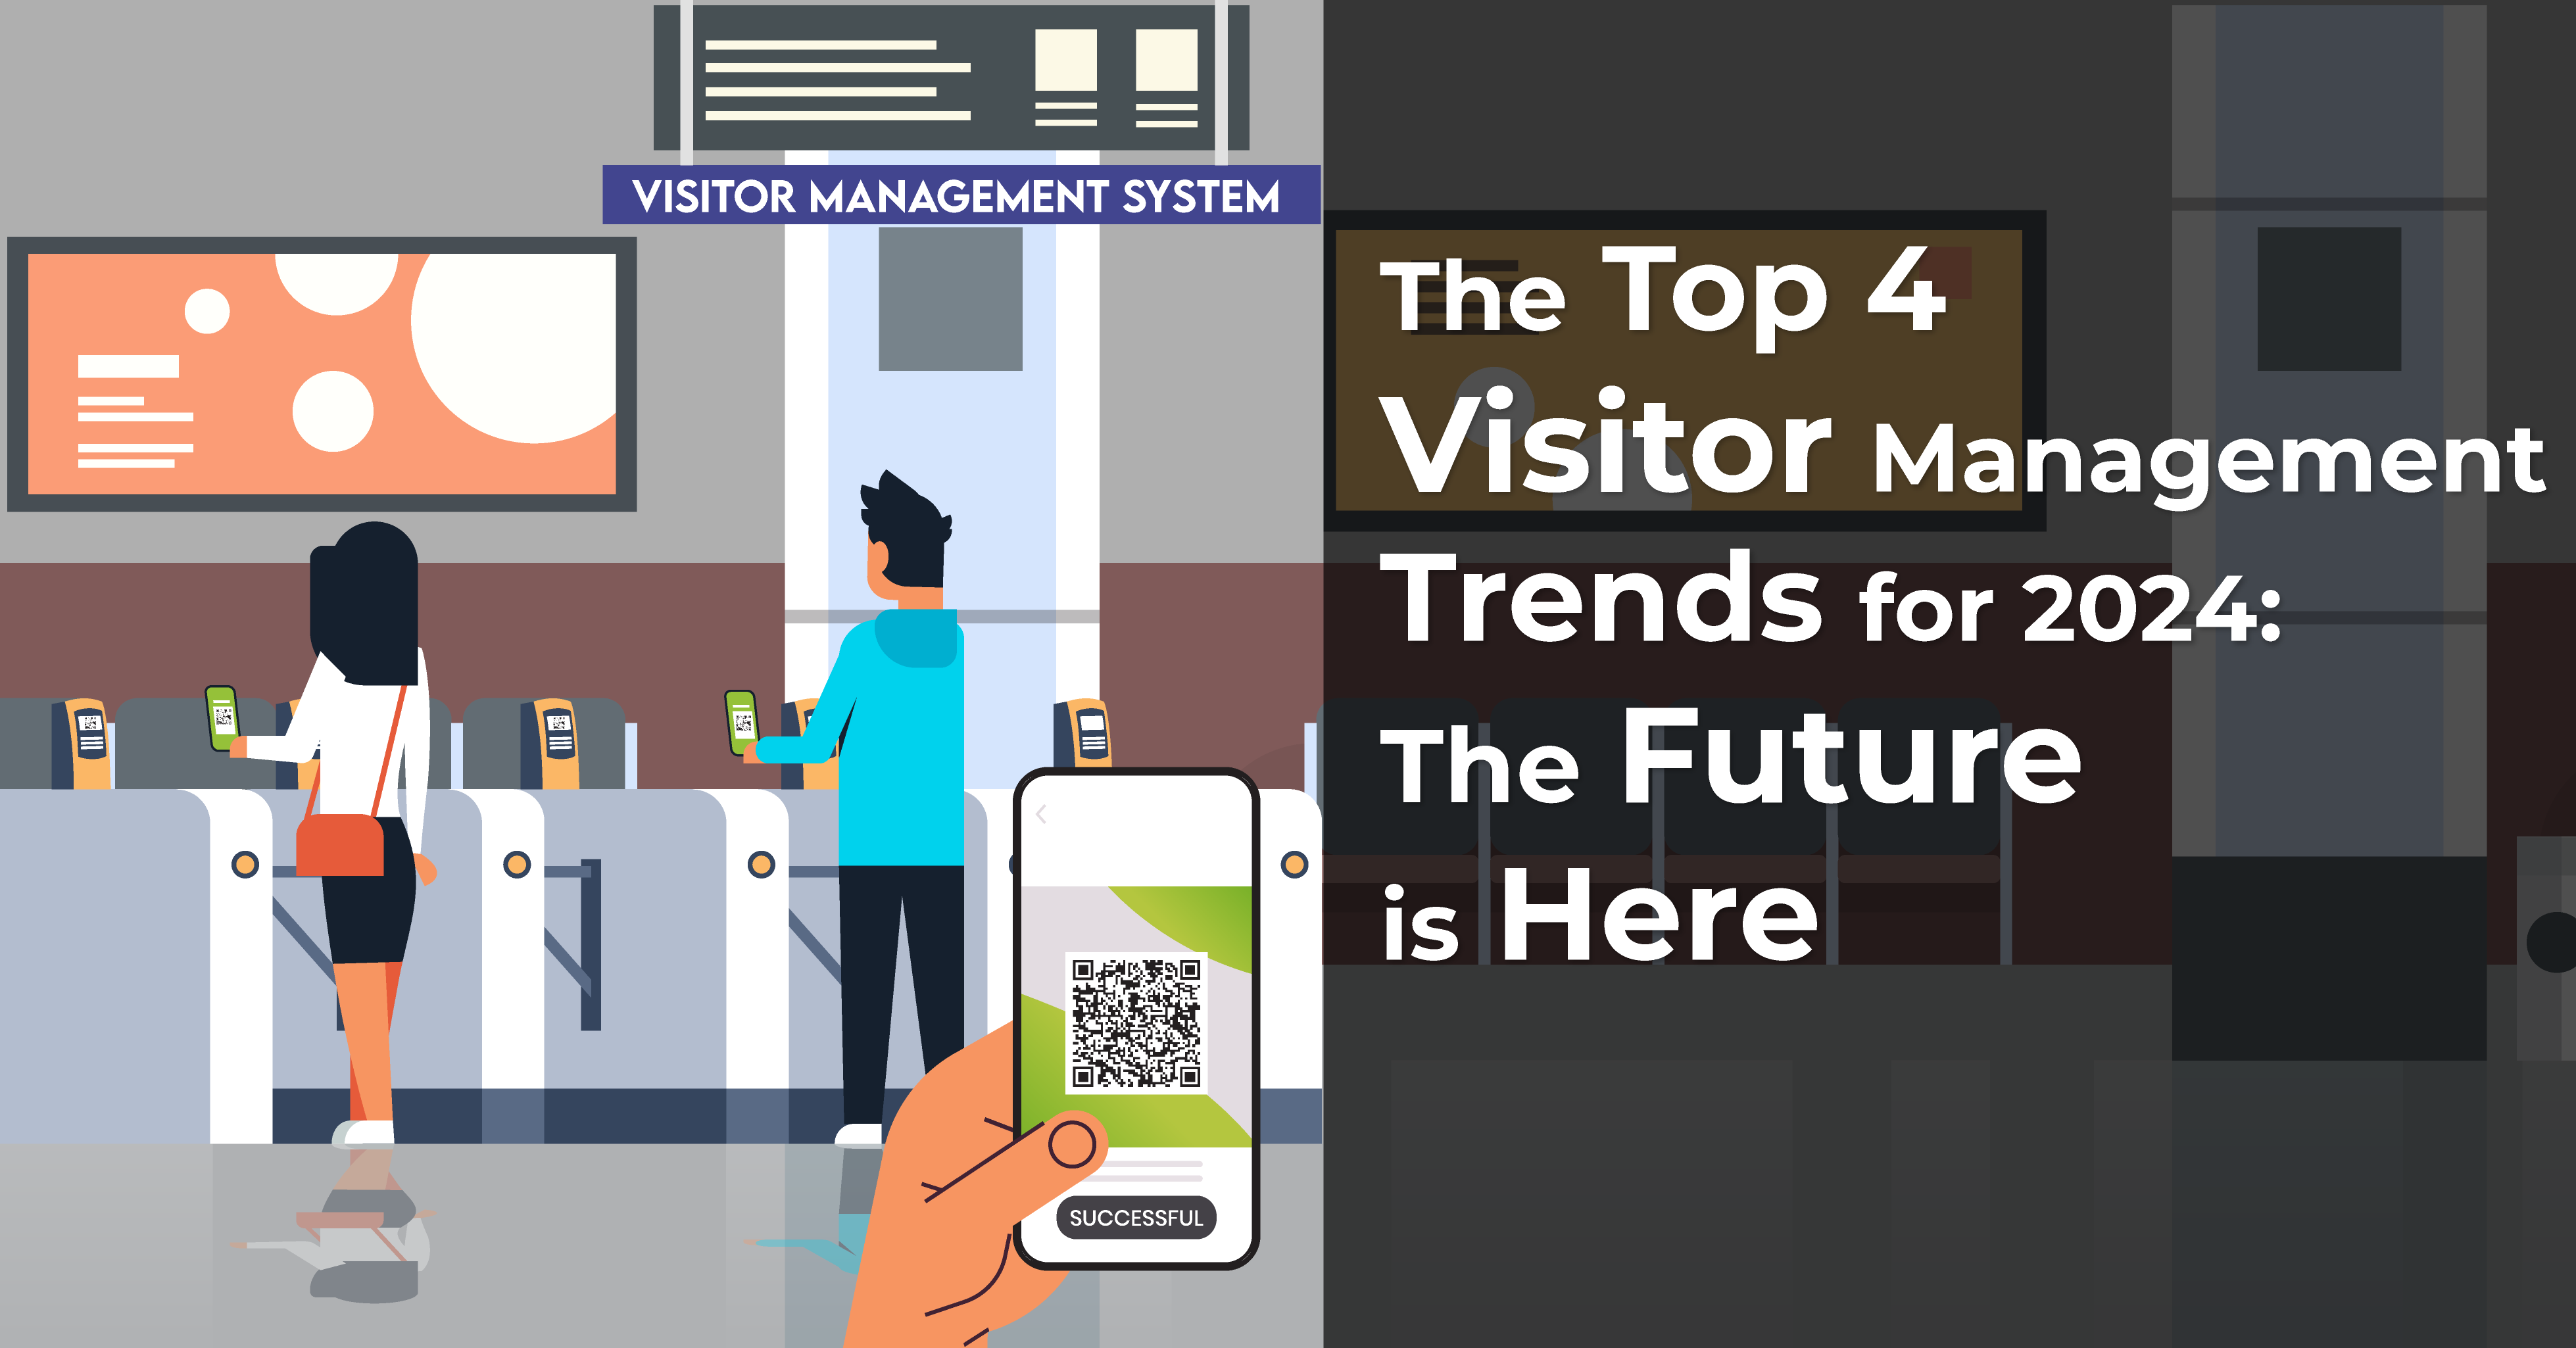 The Top 4 Visitor Management Trends for 2024